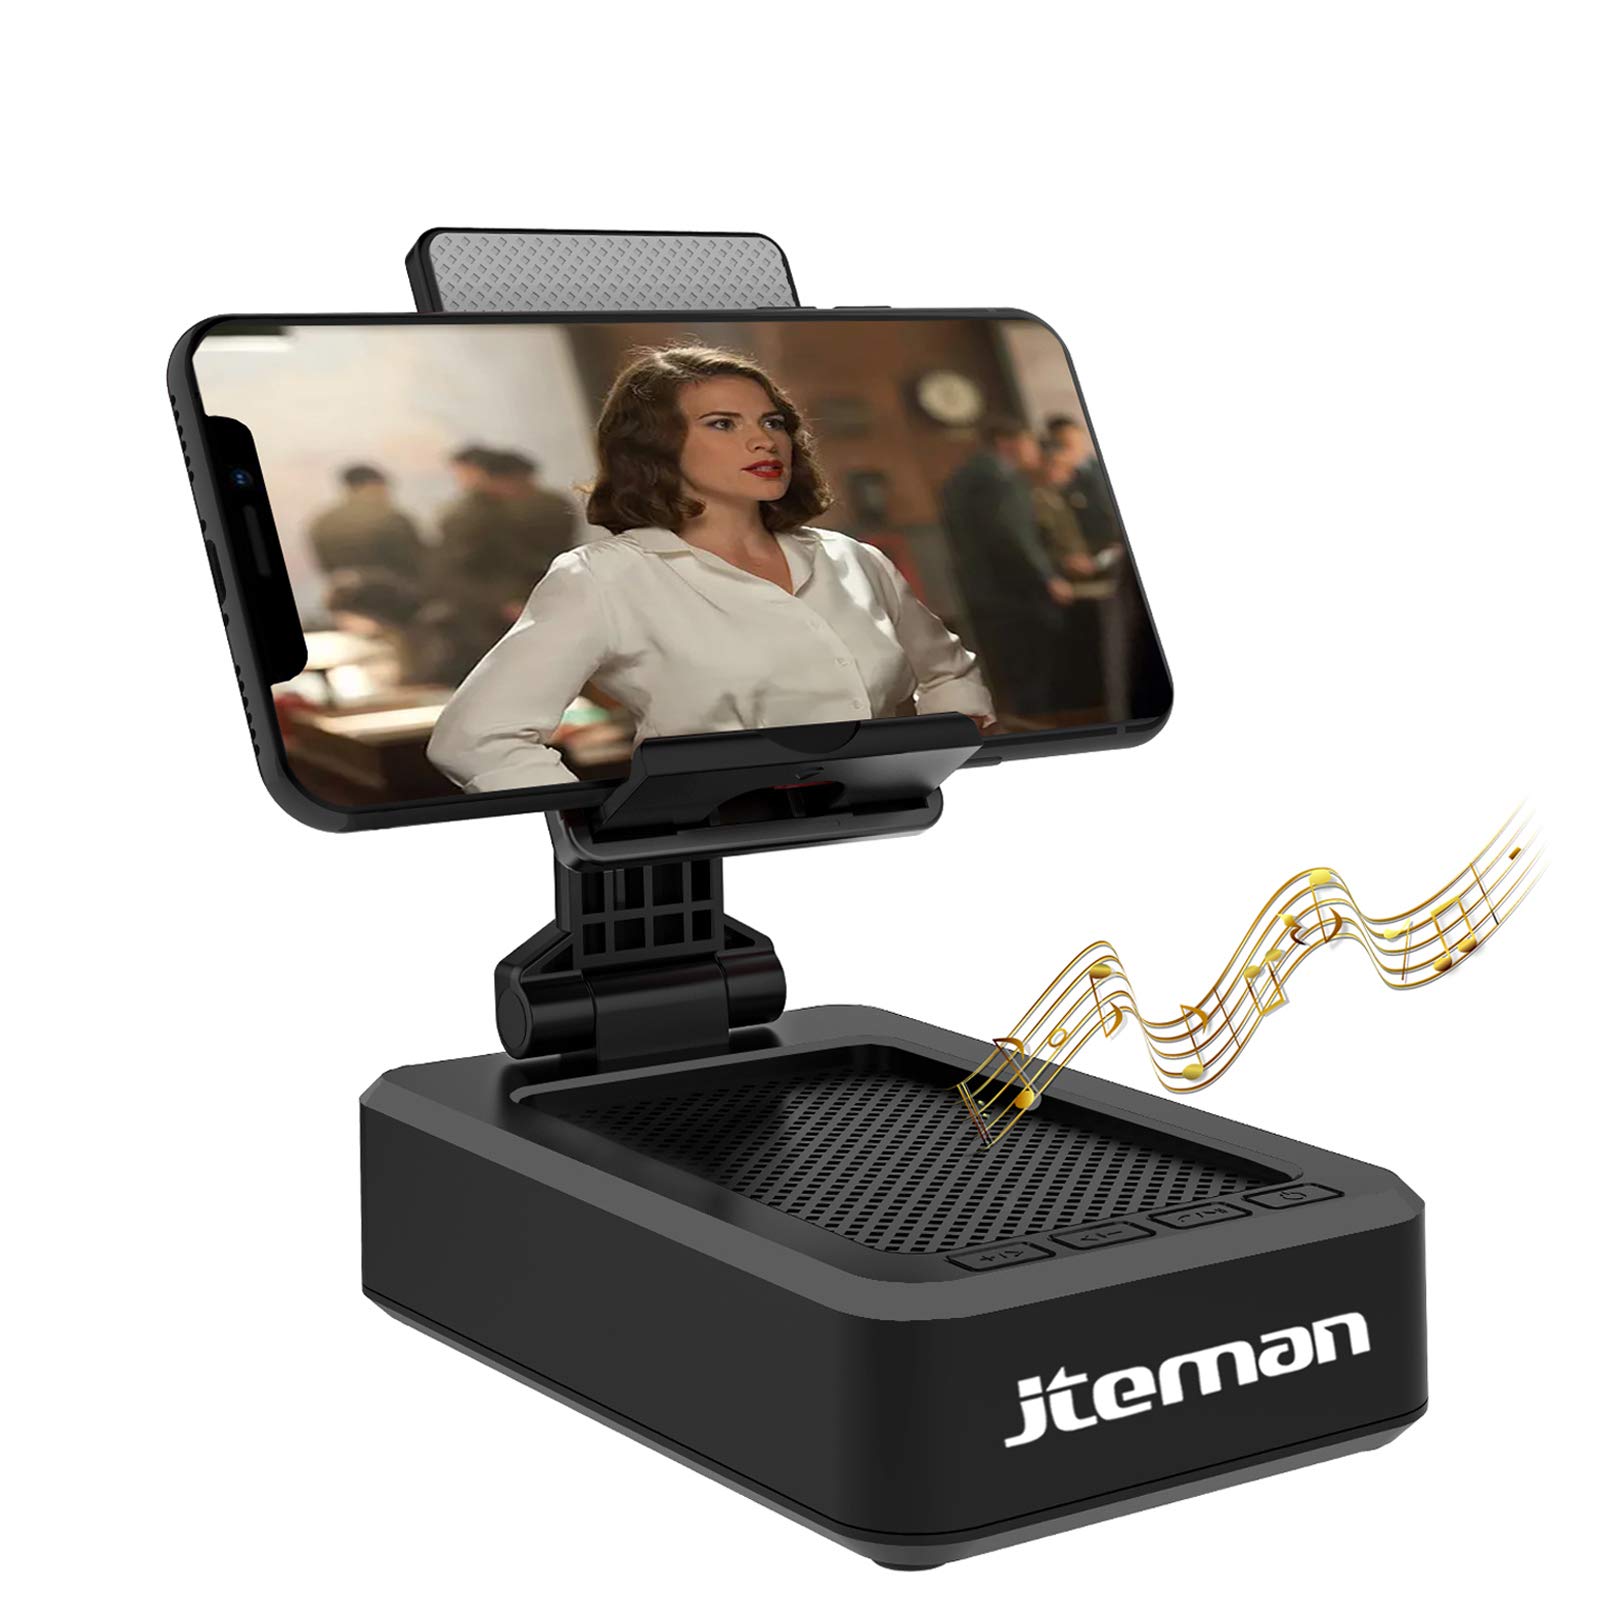 JTEMAN Cell Phone Stand with Wireless Bluetooth Speaker and Anti-Slip Base HD Surround Sound Perfect for Home and Outdoors with Bluetooth Speaker for Desk Compatible with iPhone/ipad/Samsung Galaxy